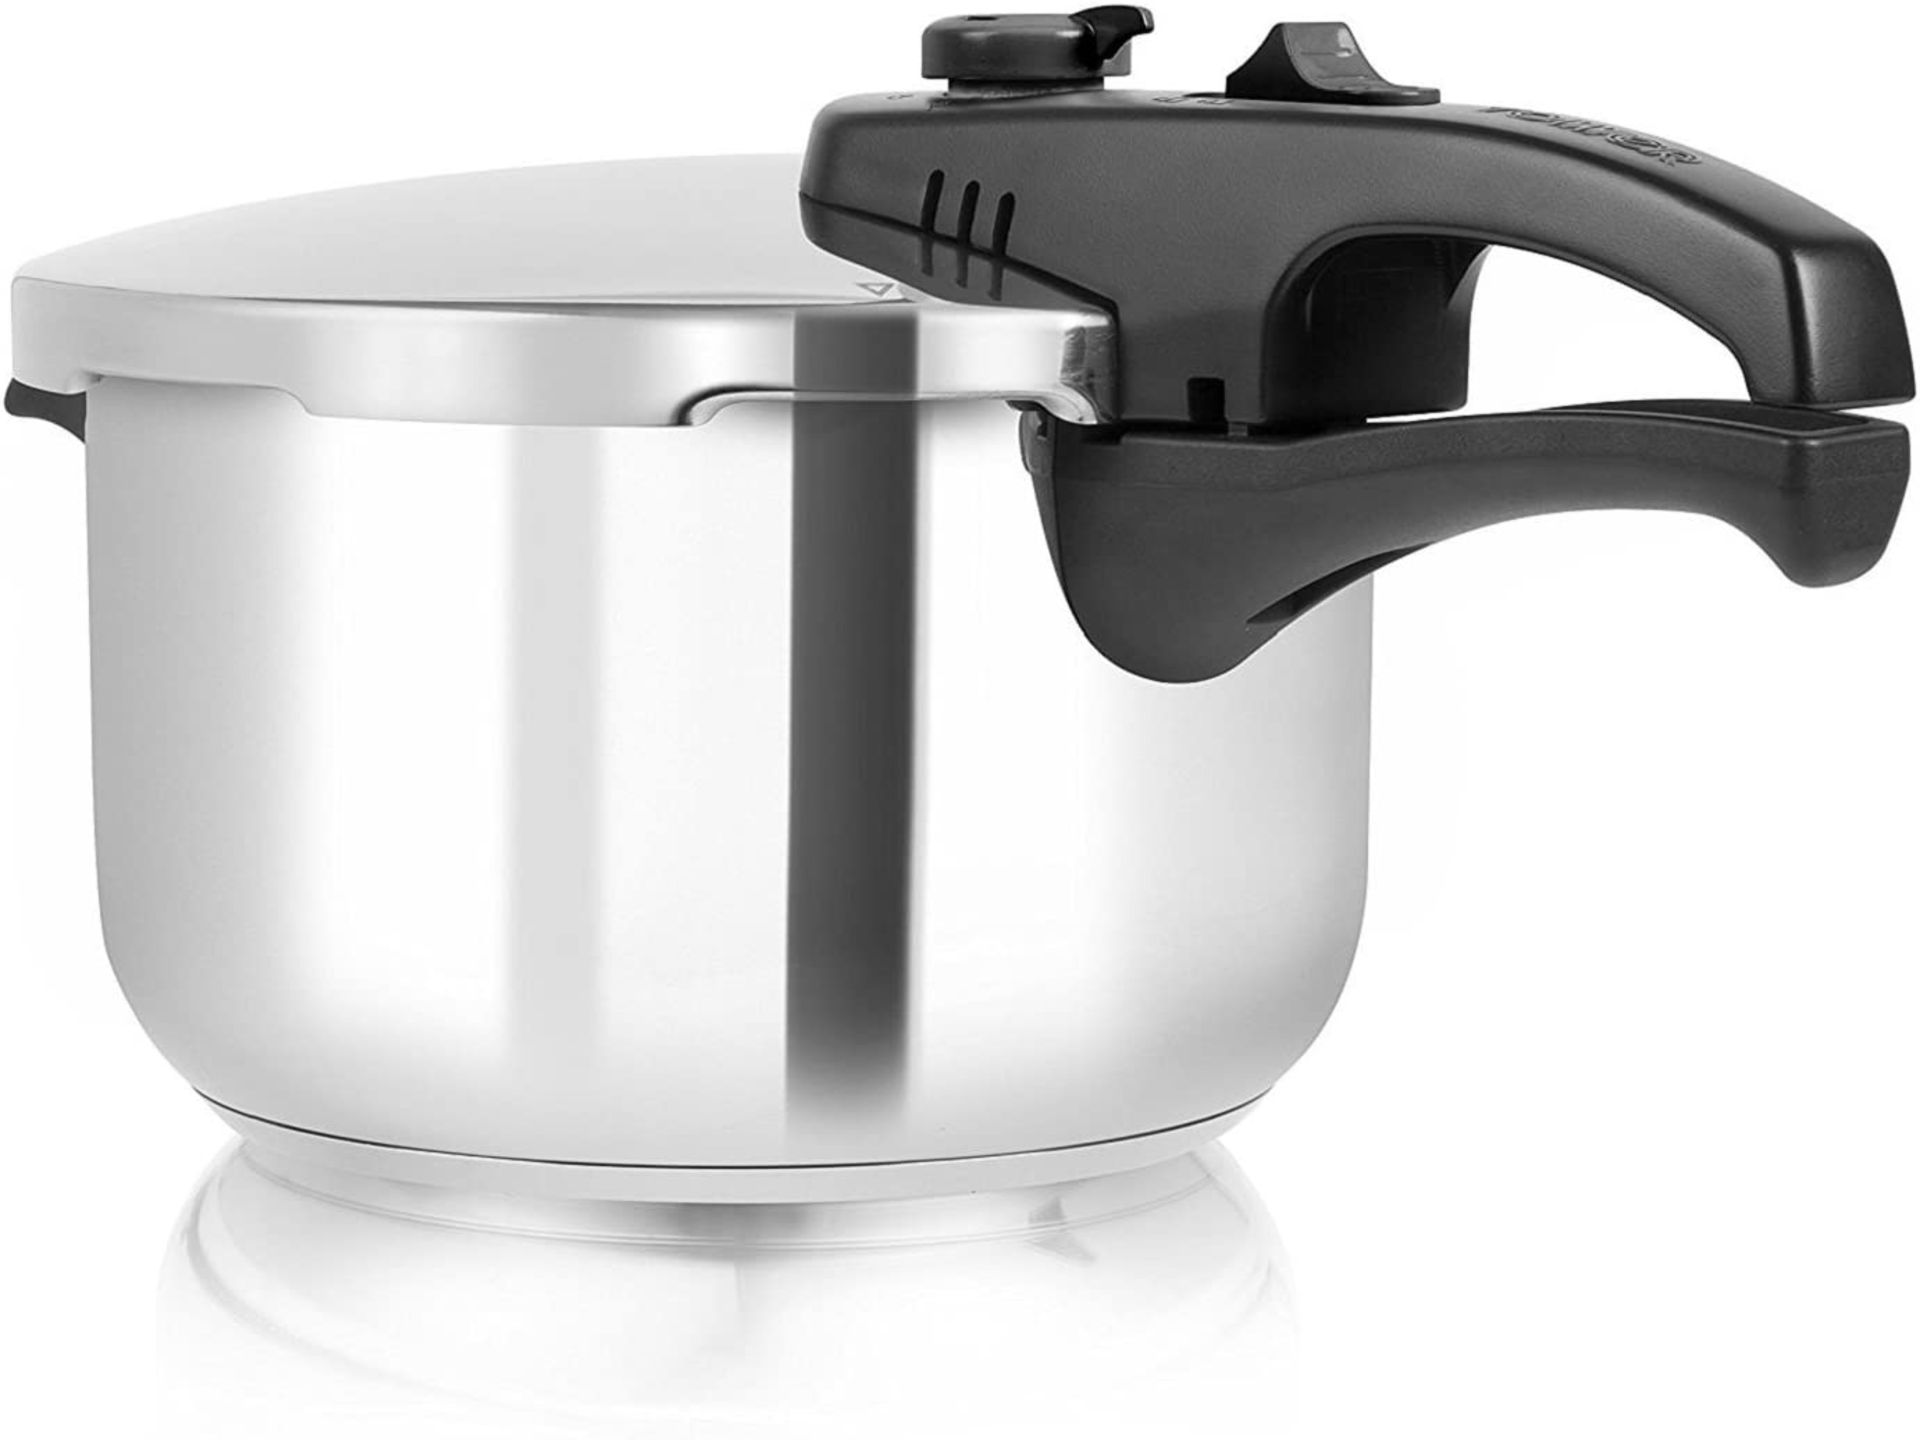 Tower T80245 Pressure Cooker with Steamer Basket, Stainless Steel, 3 Litre